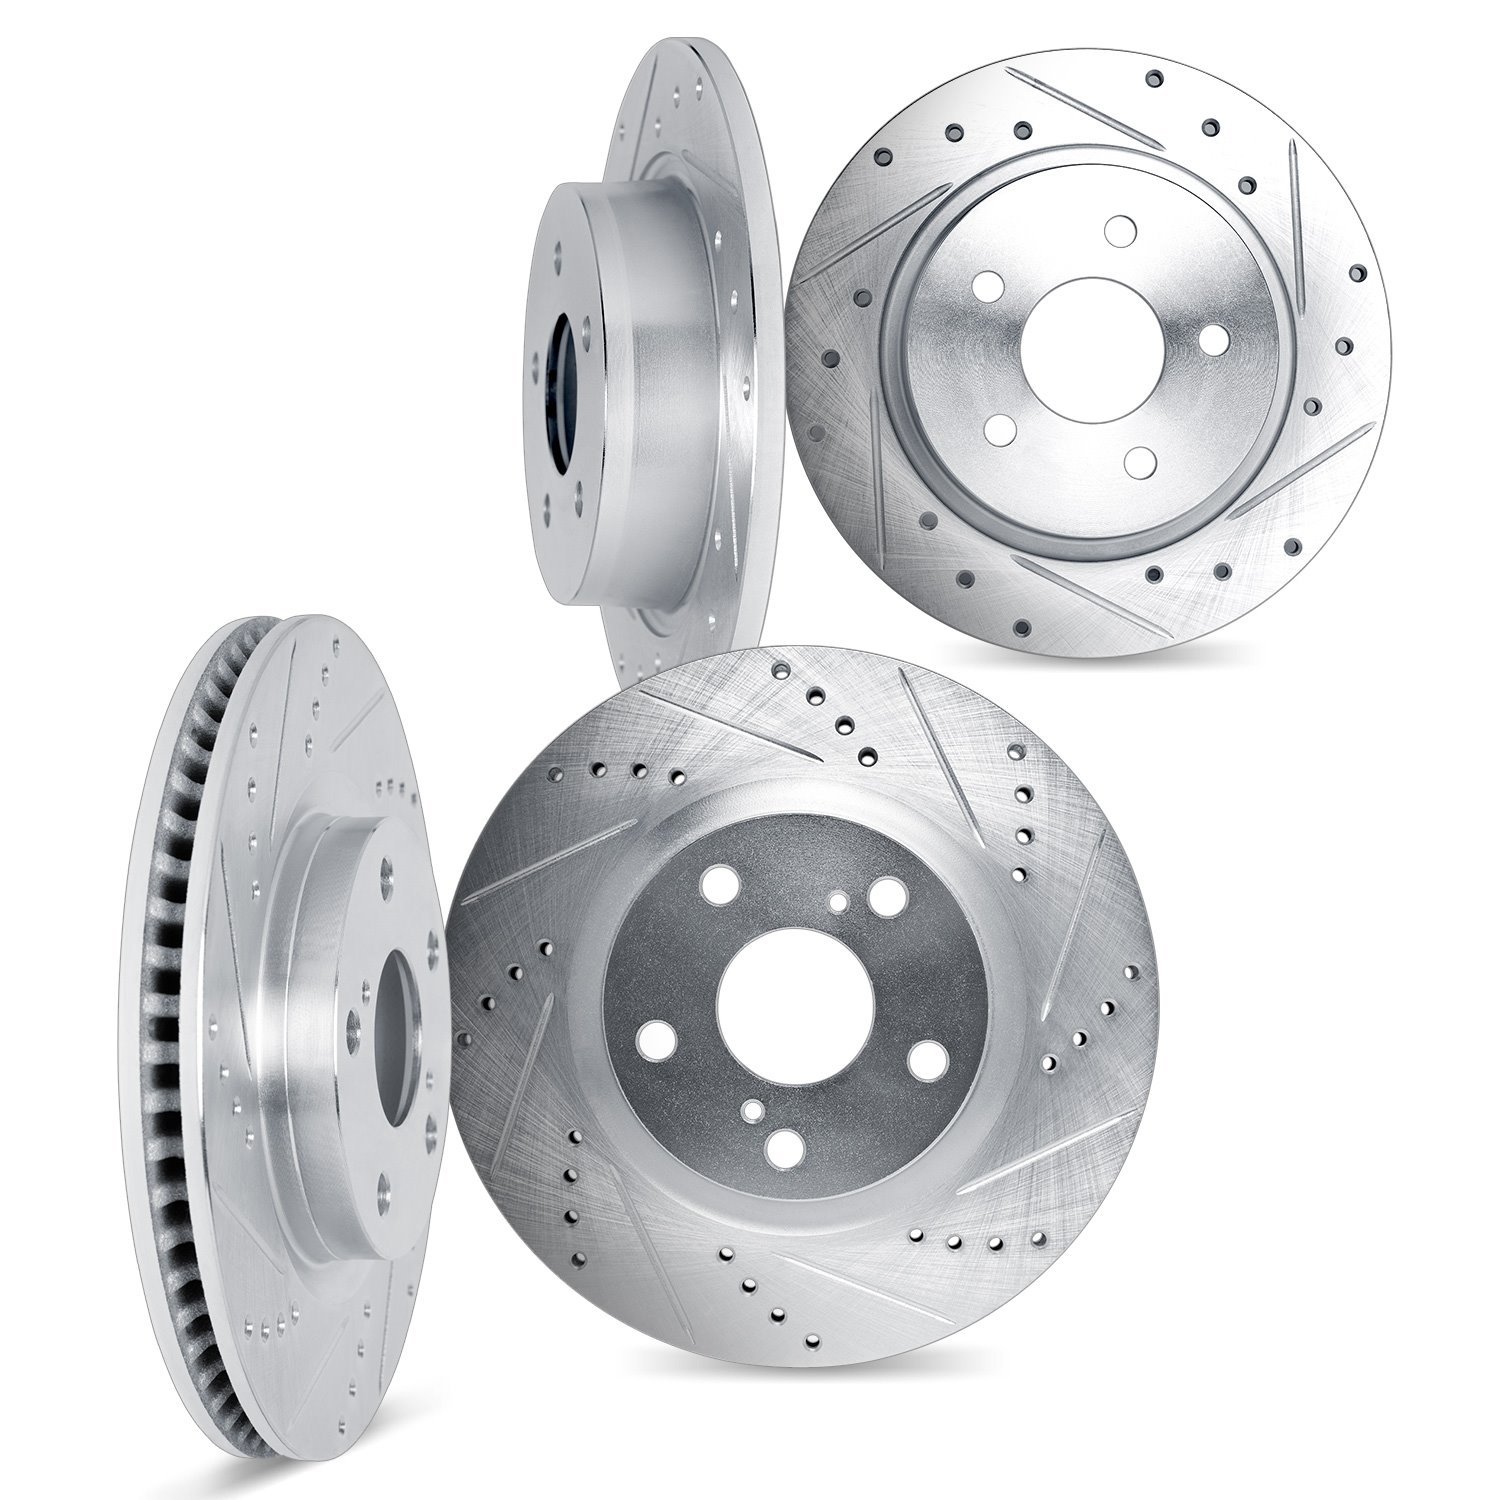 7004-59054 Drilled/Slotted Brake Rotors [Silver], Fits Select Acura/Honda, Position: Front and Rear